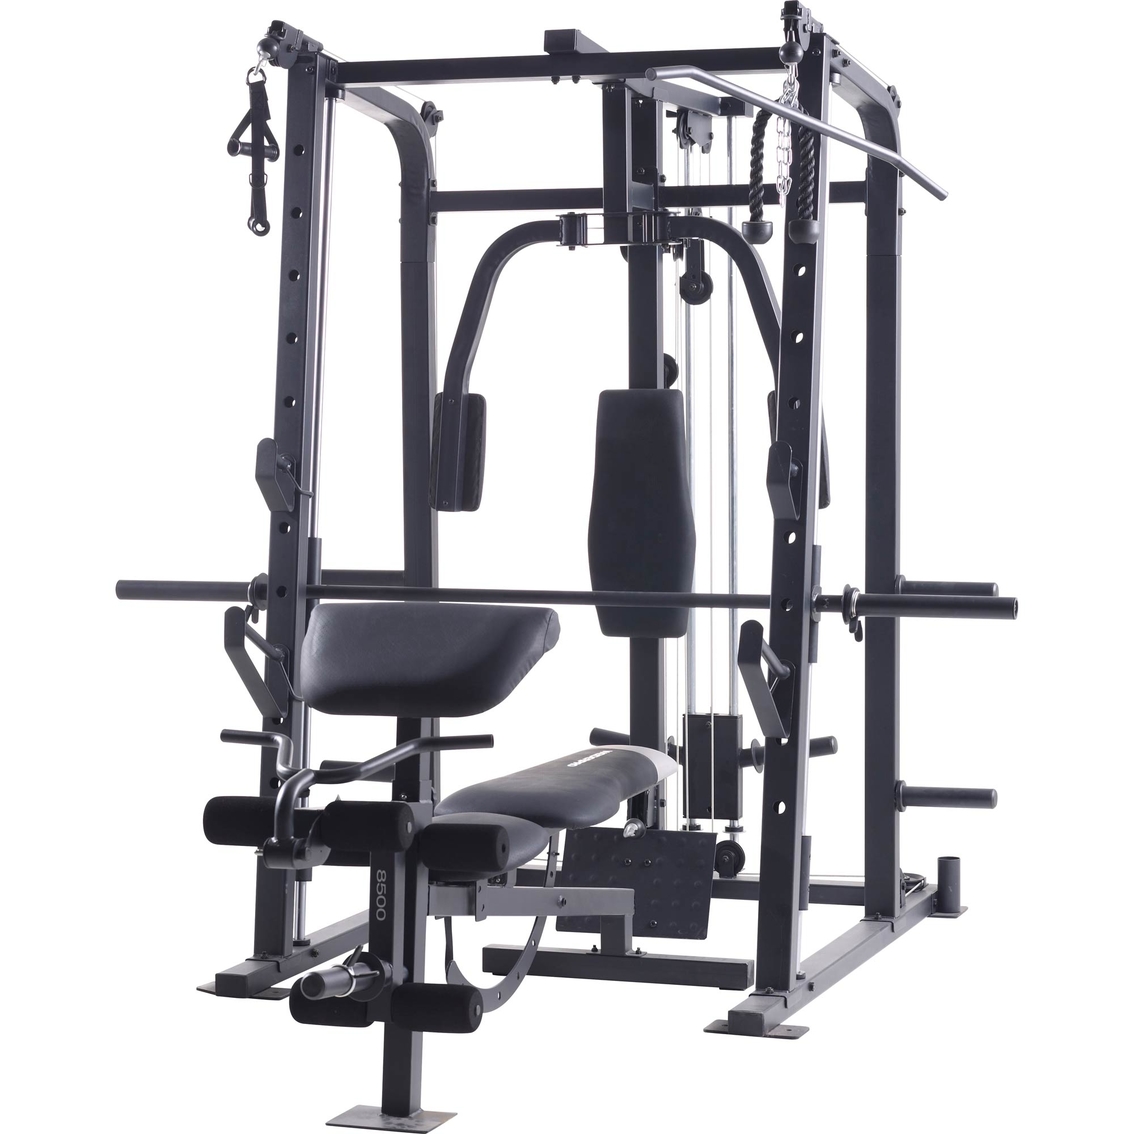 Weider 8500 Fitness Accessories | Sports & Outdoors | Shop The